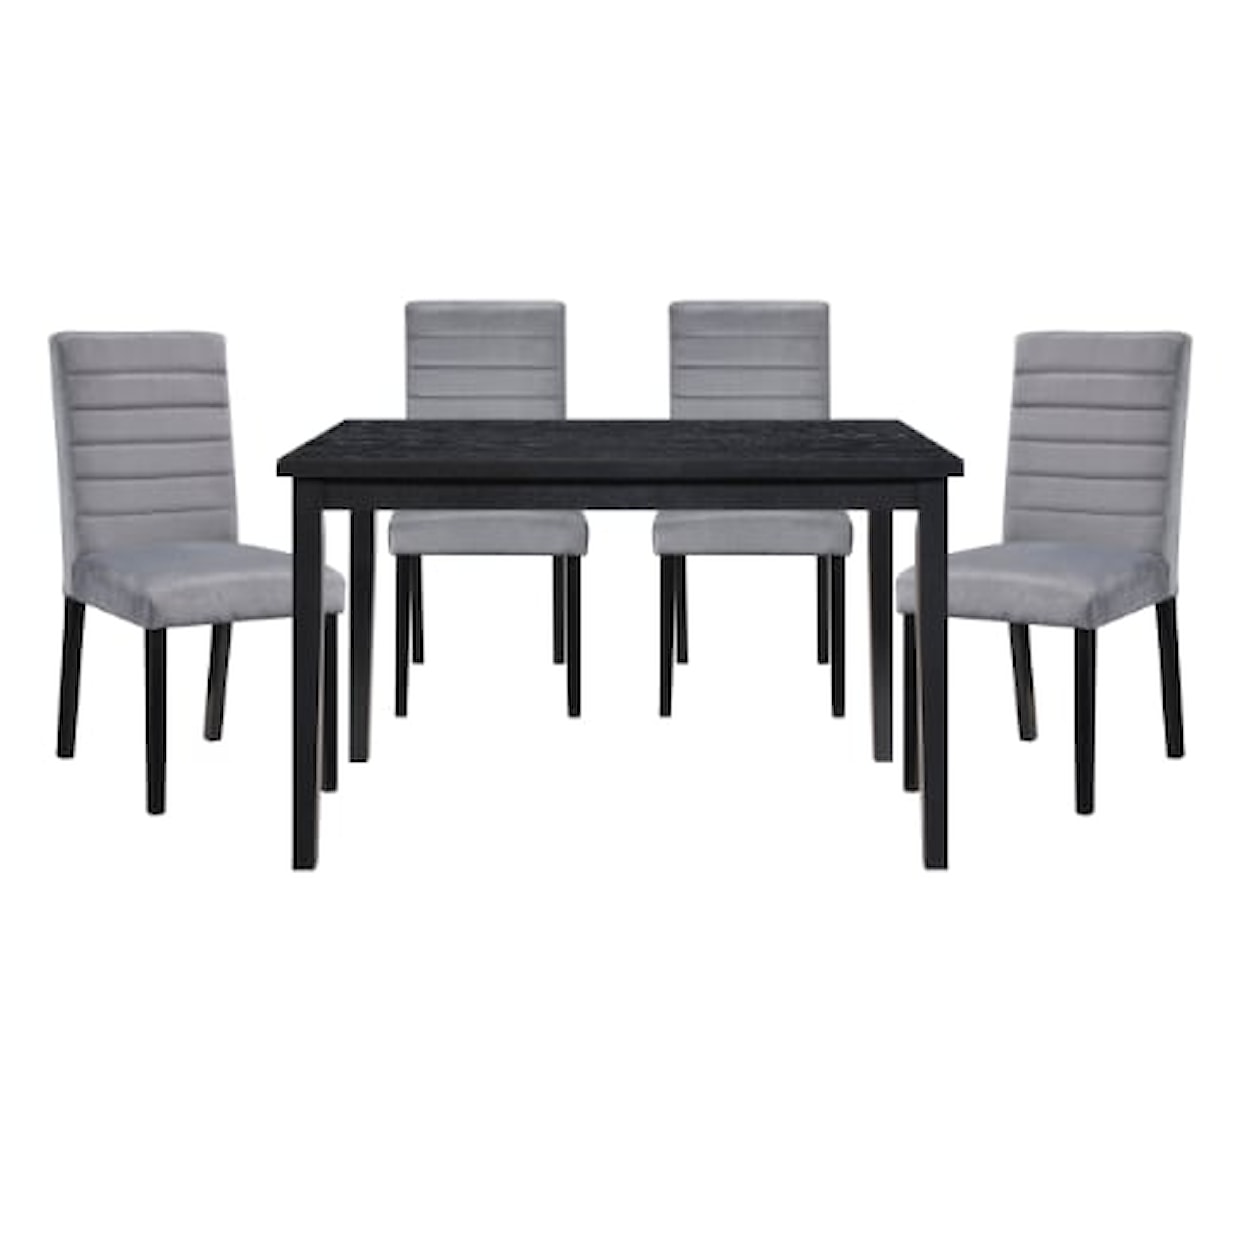 Homelegance Andreas 5-Piece Dining Set